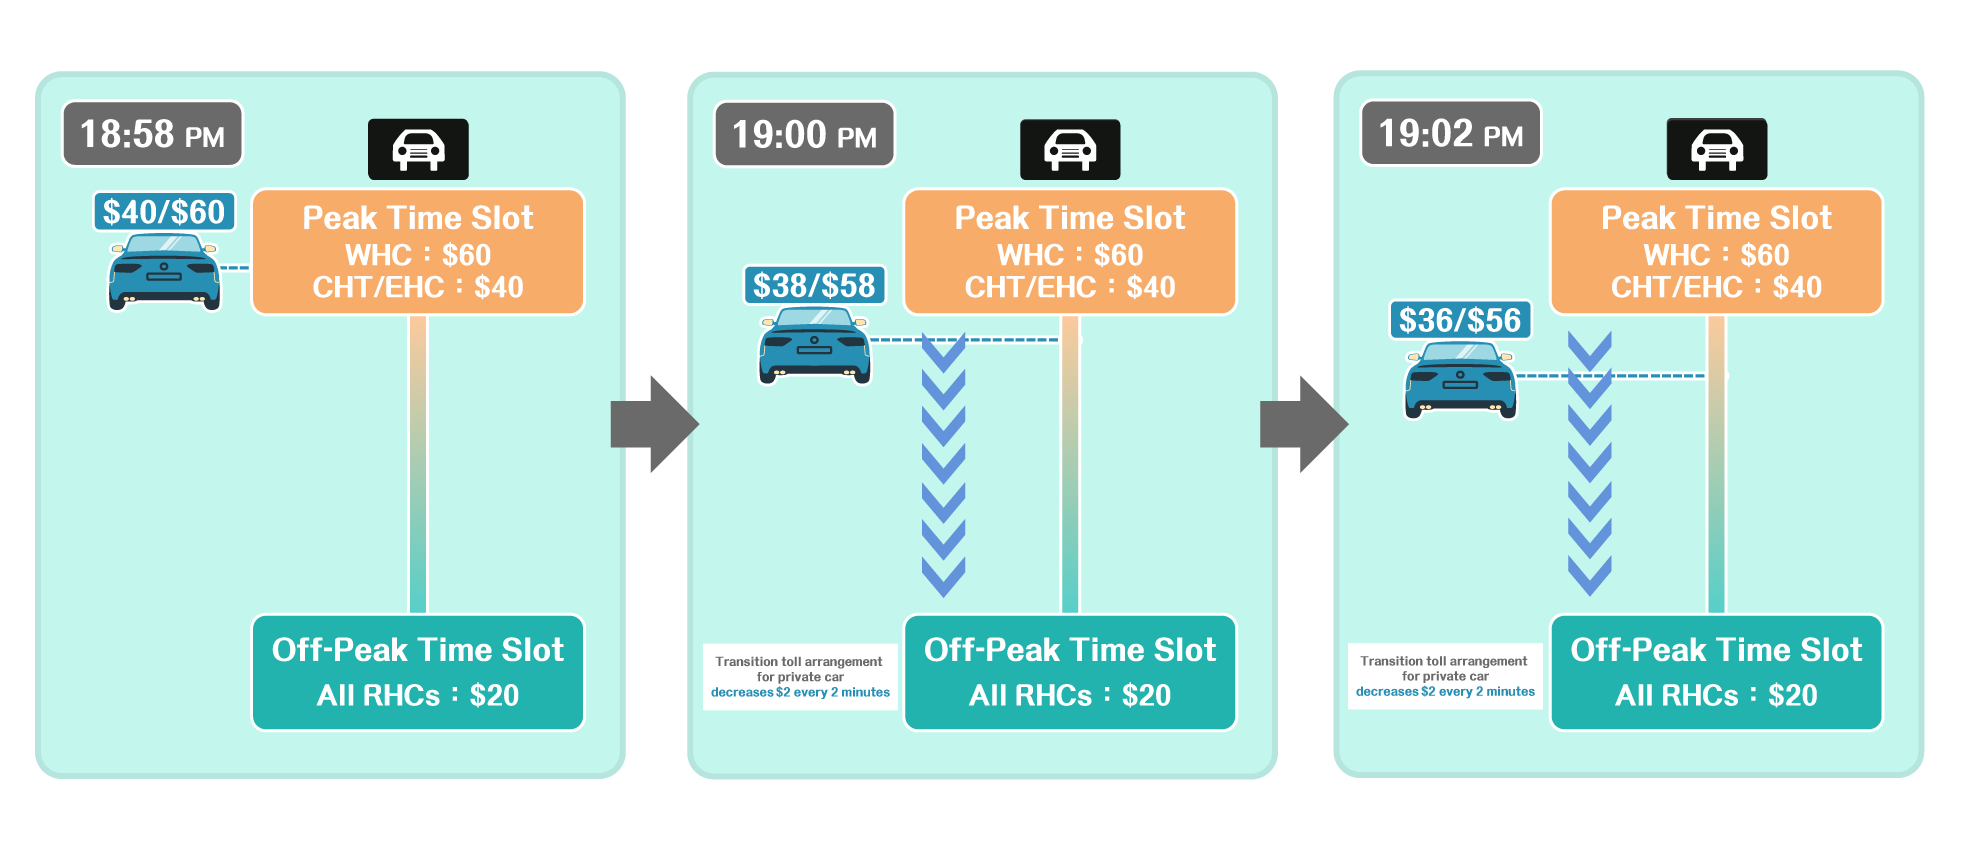 Toll transition from PM peak time slot to off-peak time slot on Mondays to Saturdays (excluding general holidays)